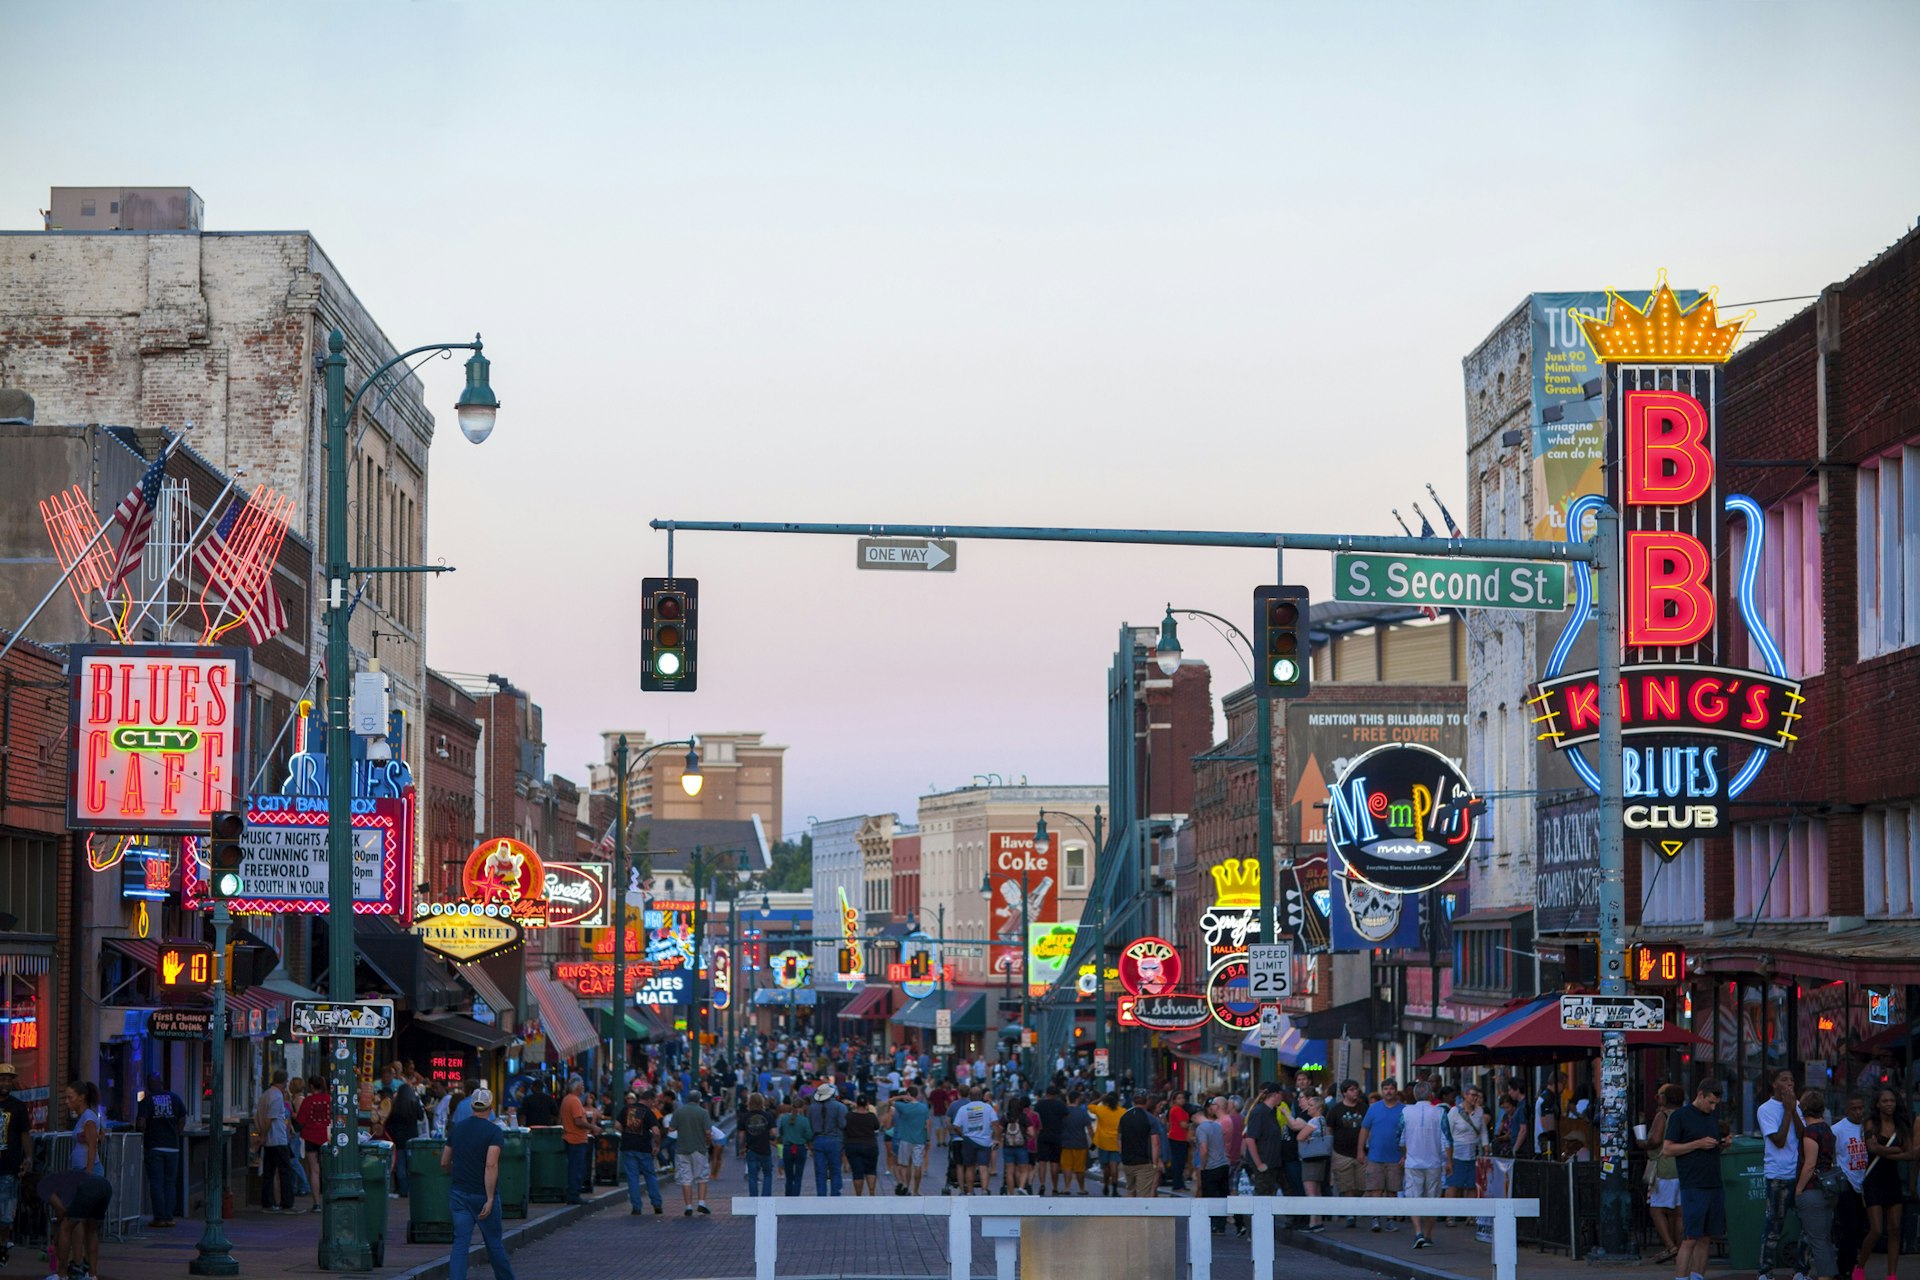 Beale Street at night with crowds of people outside live music venues